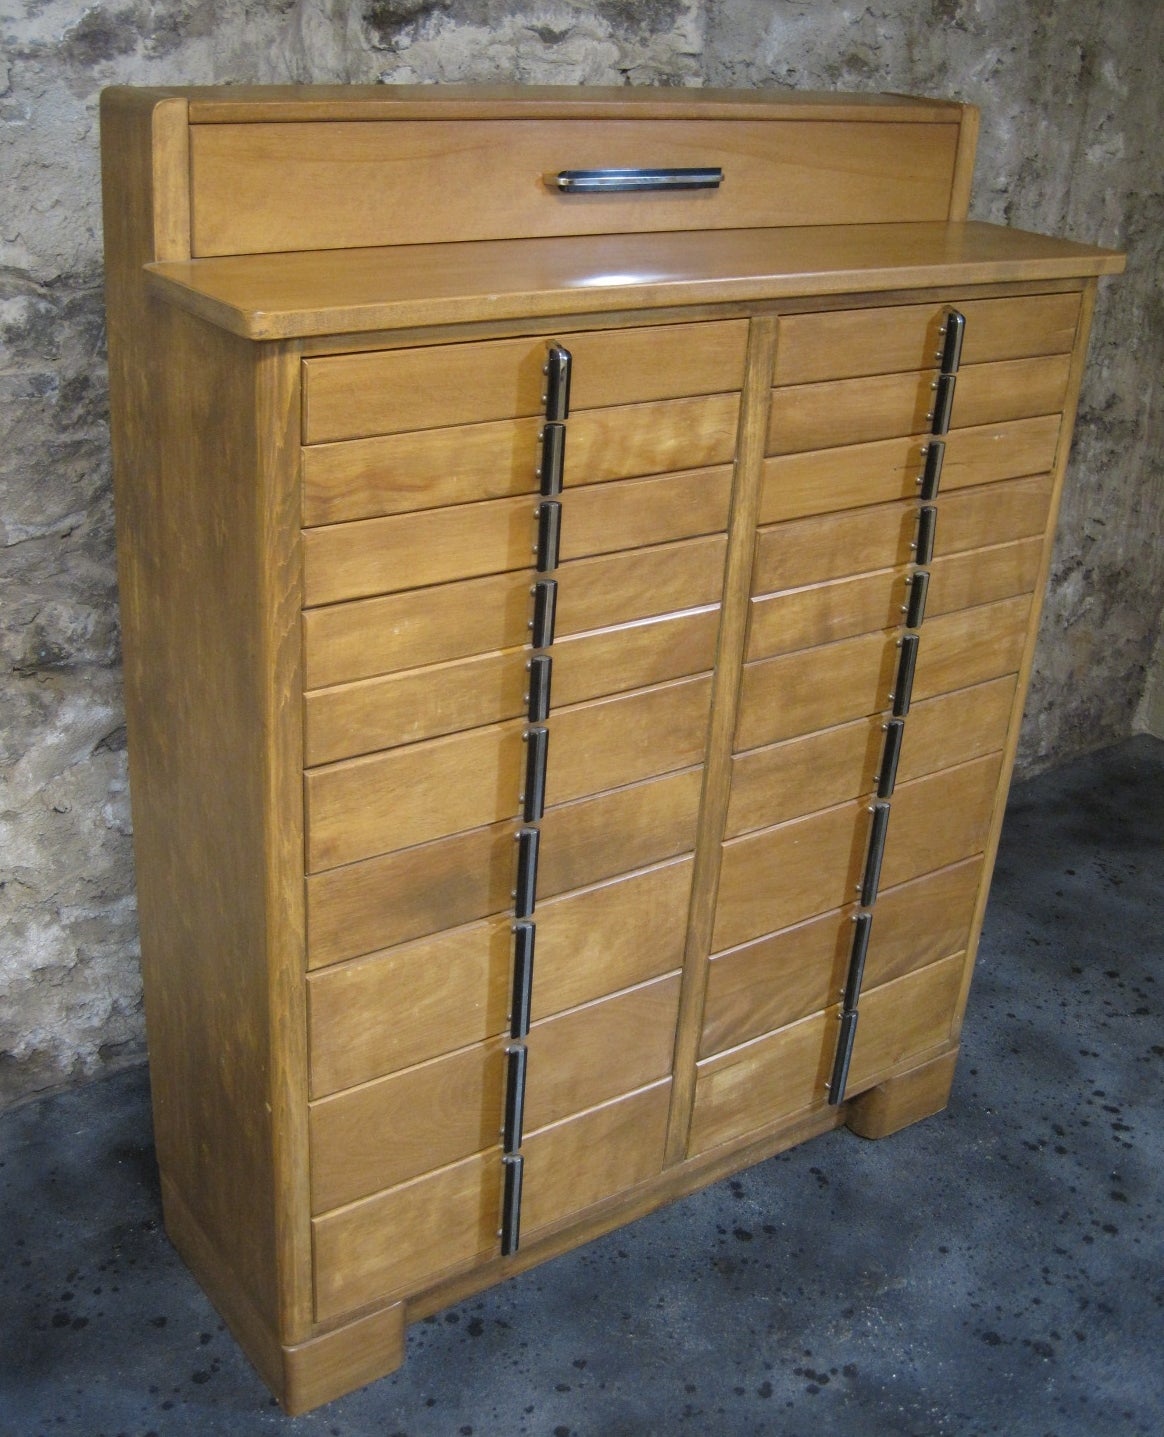 20 drawer Art Deco Dental Cabinet.

Free shipping within the United States and Canada.